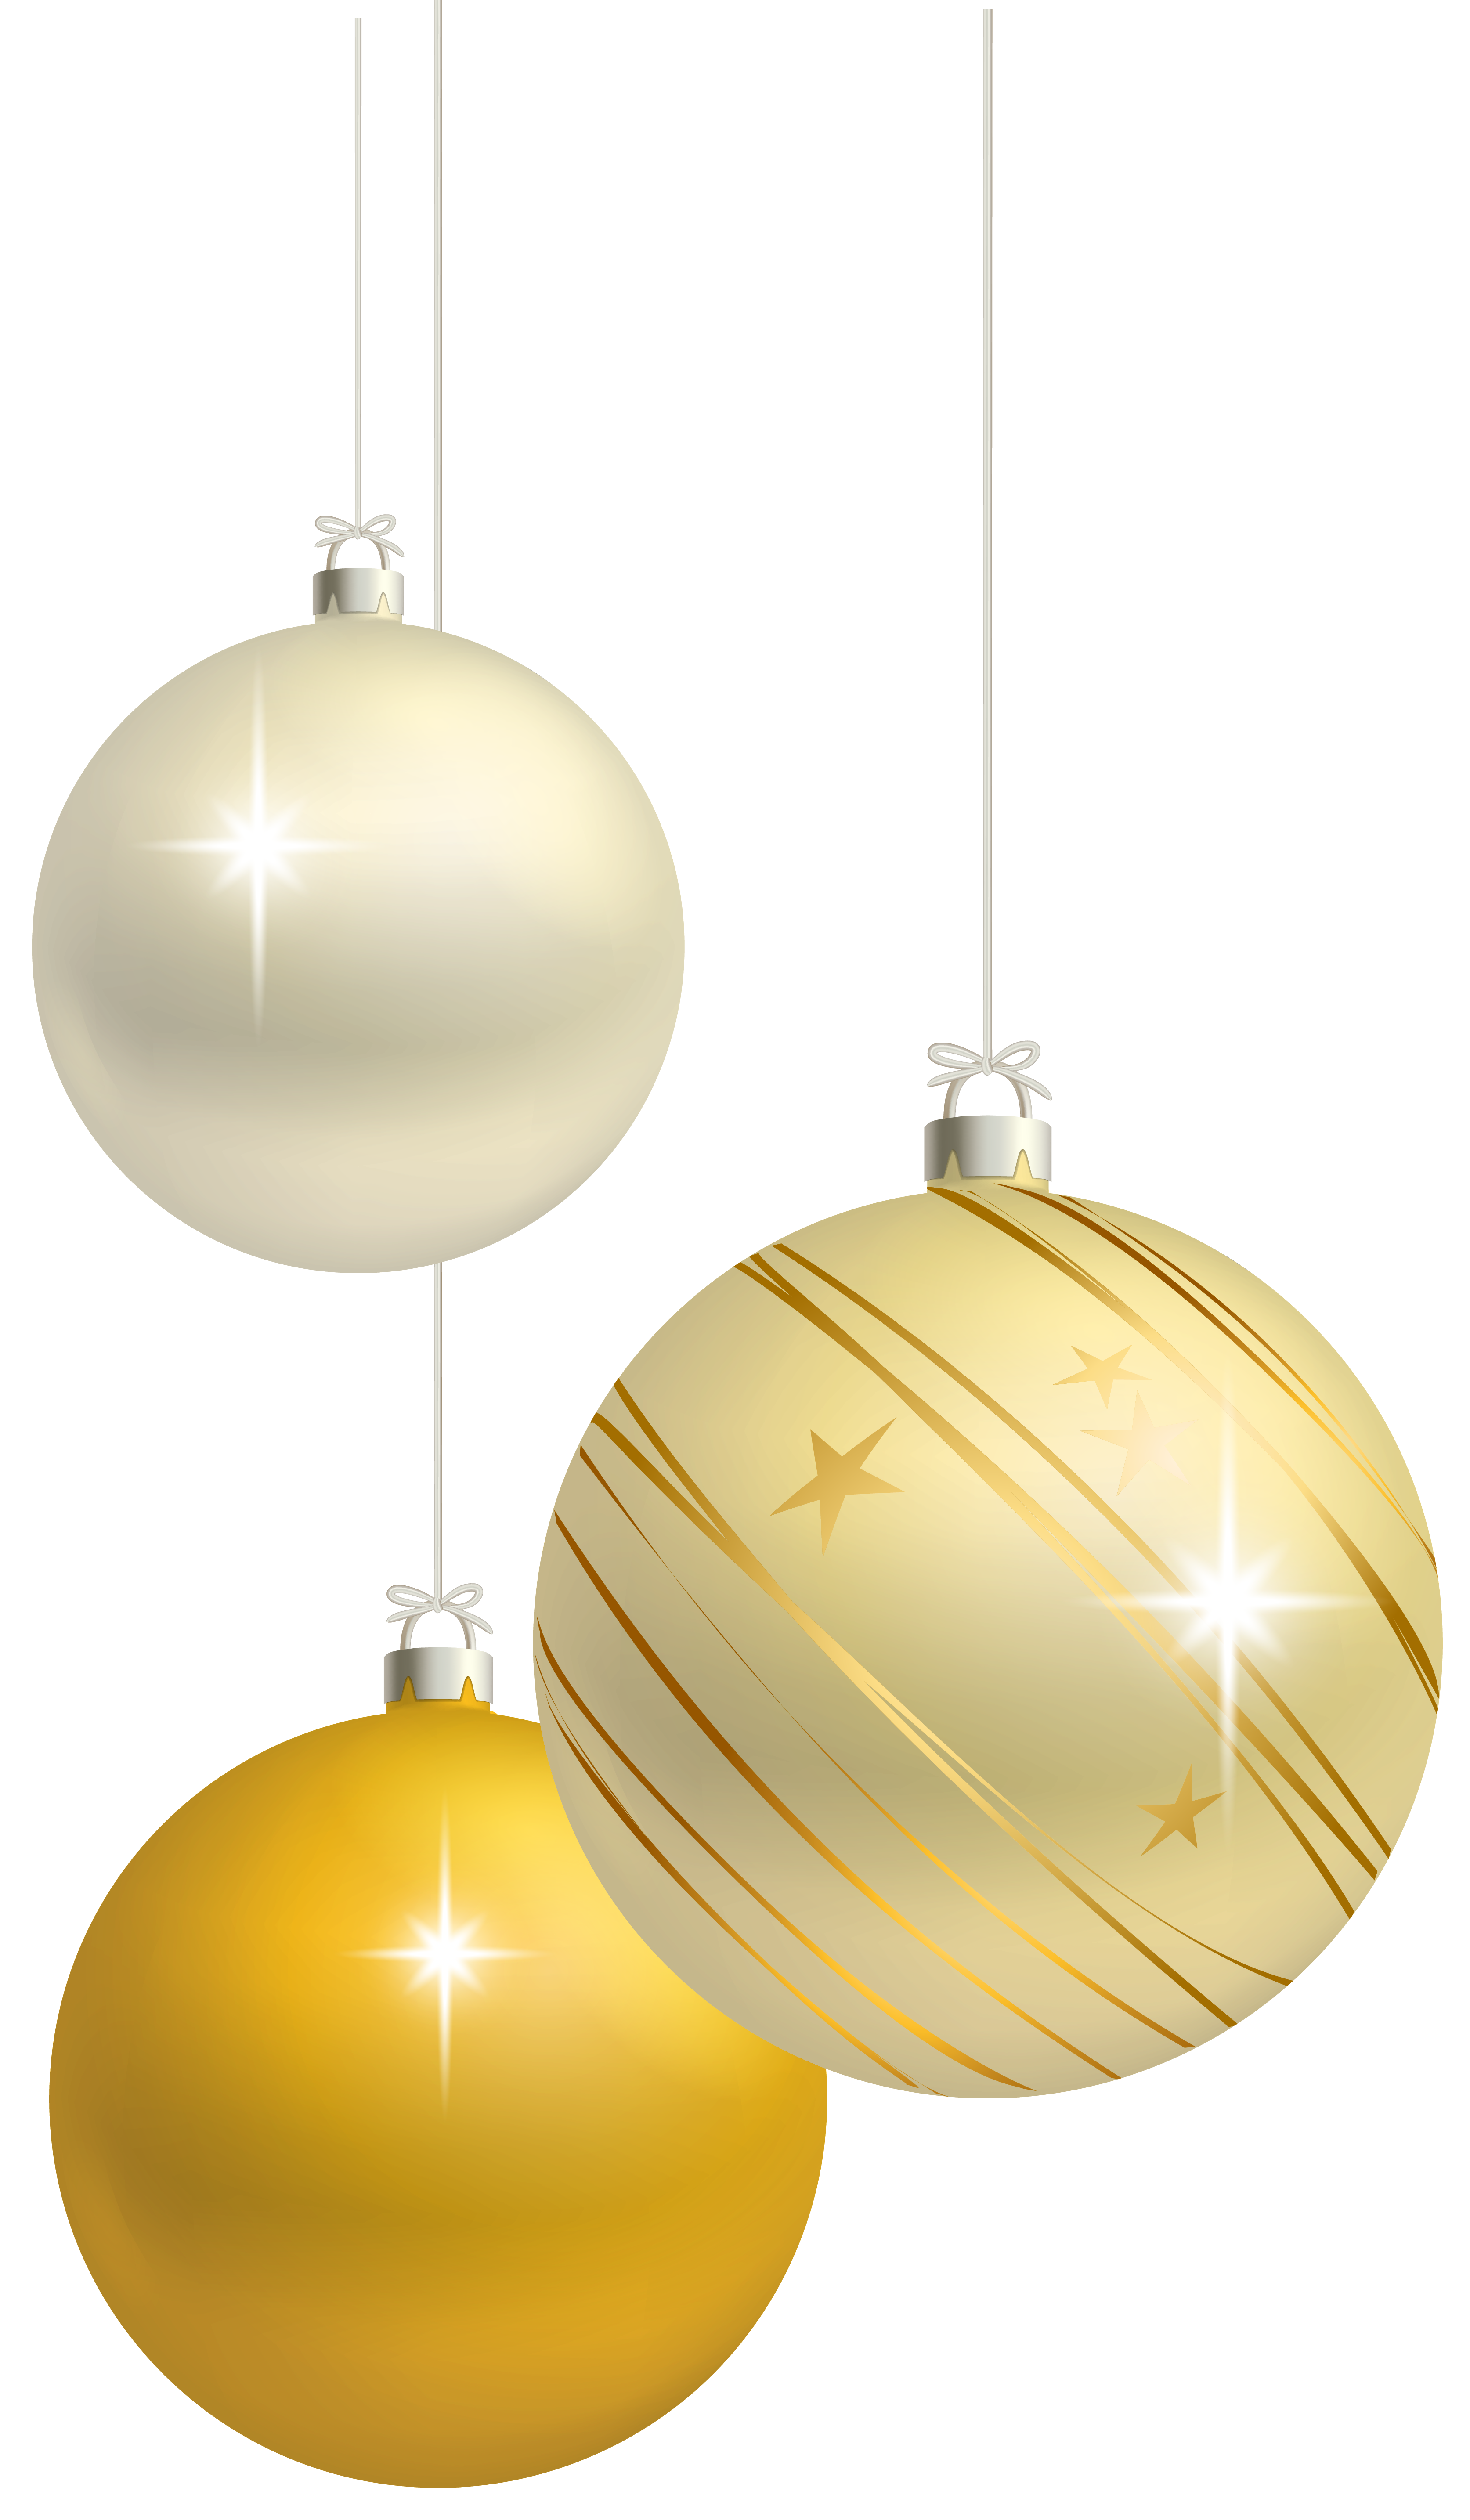 White and Yellow Christmas Balls Decoration PNG Clipart Image | Gallery ...